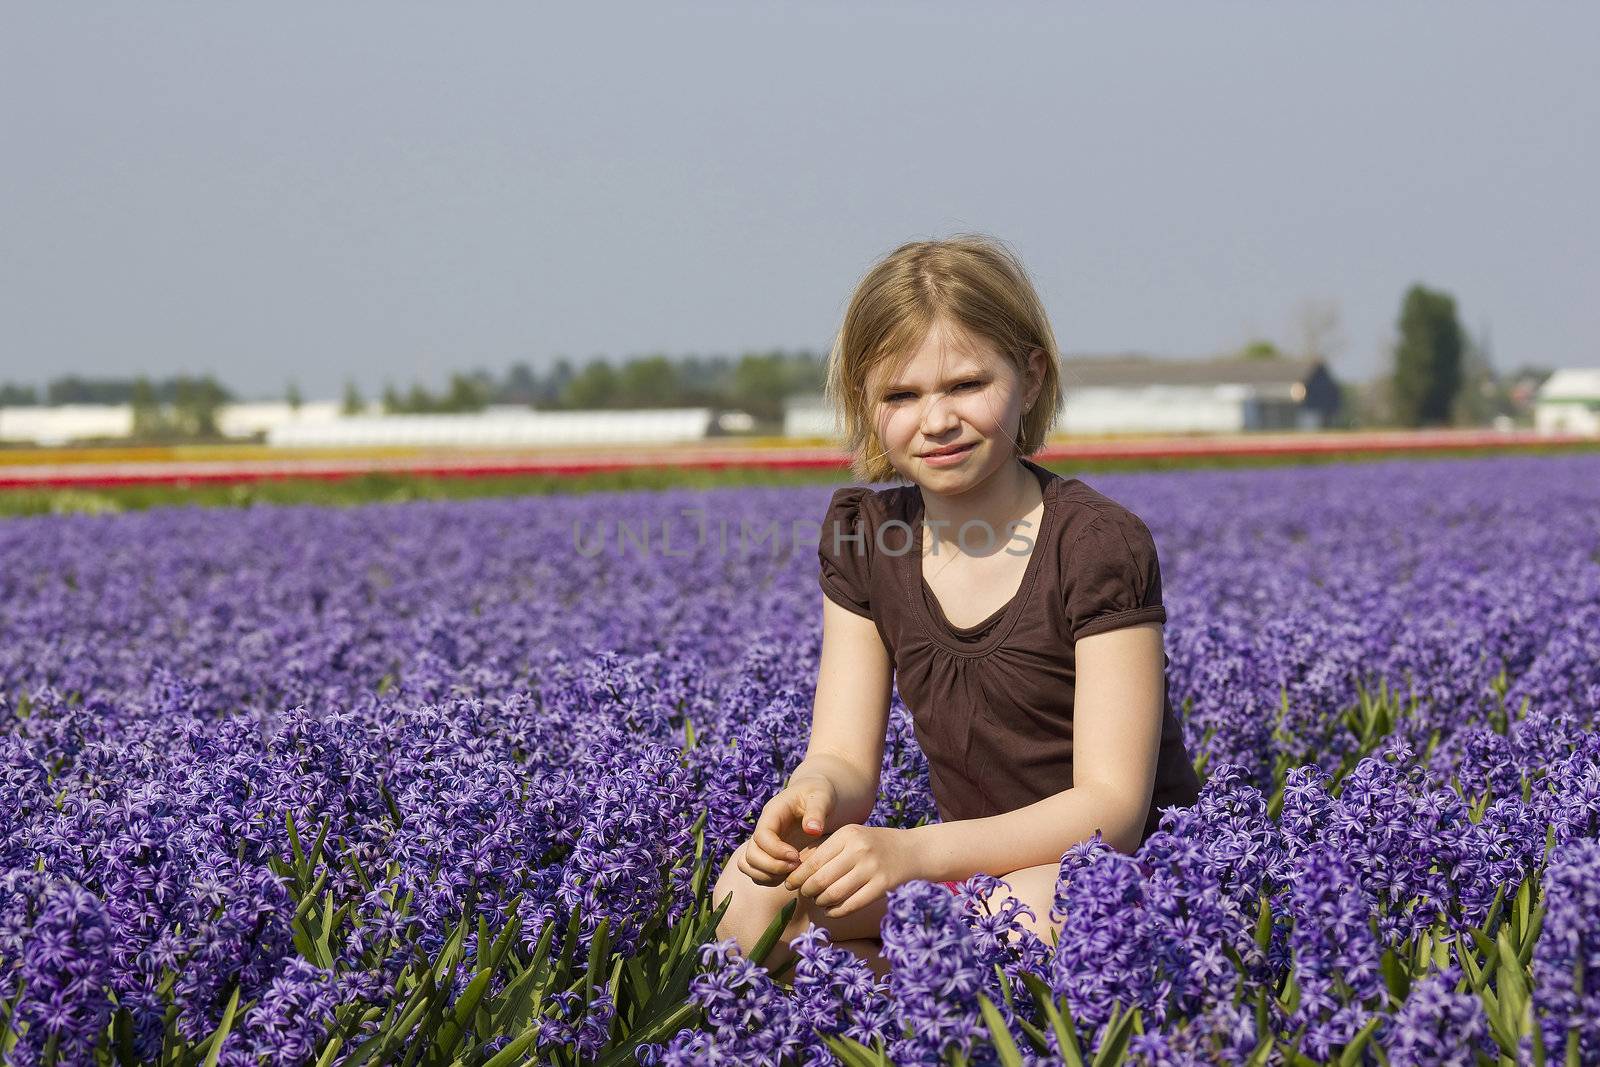 little girl in the hyacinth flowers by miradrozdowski